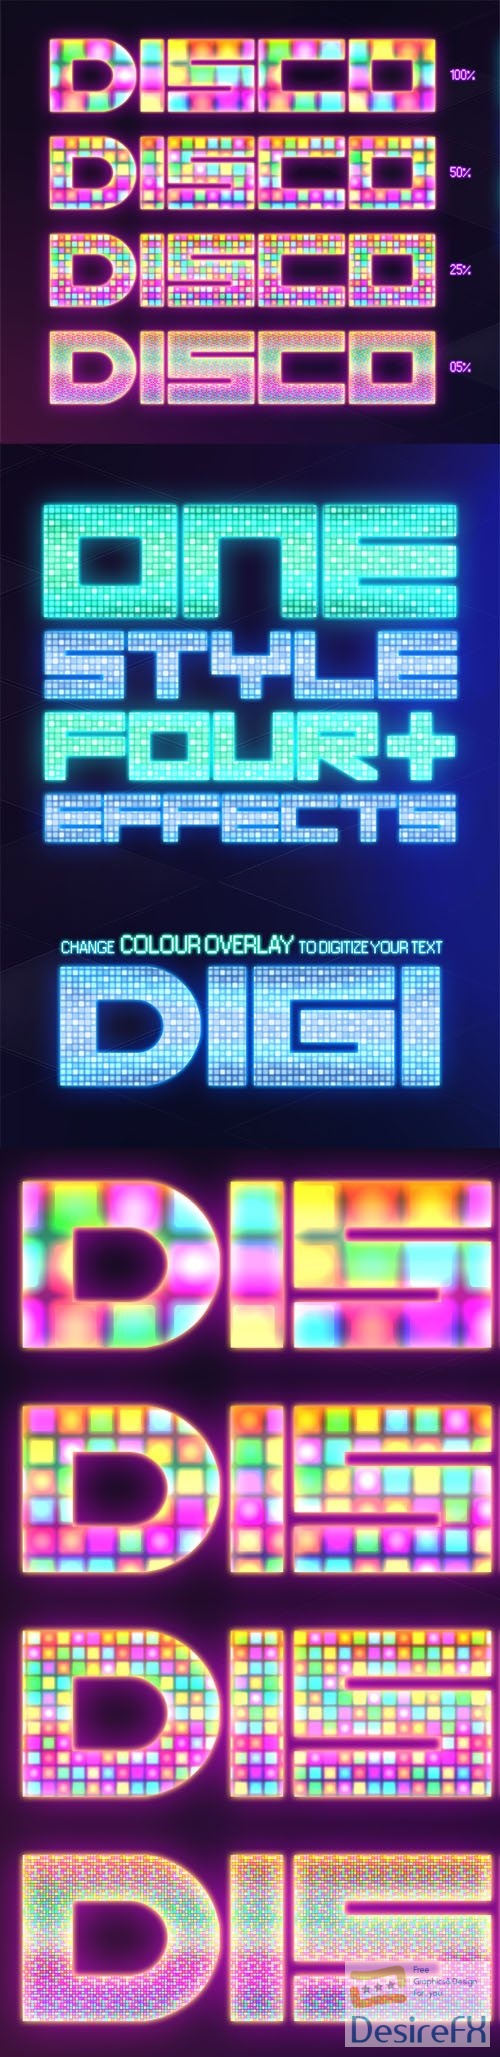 Disco Photoshop Styles Collection